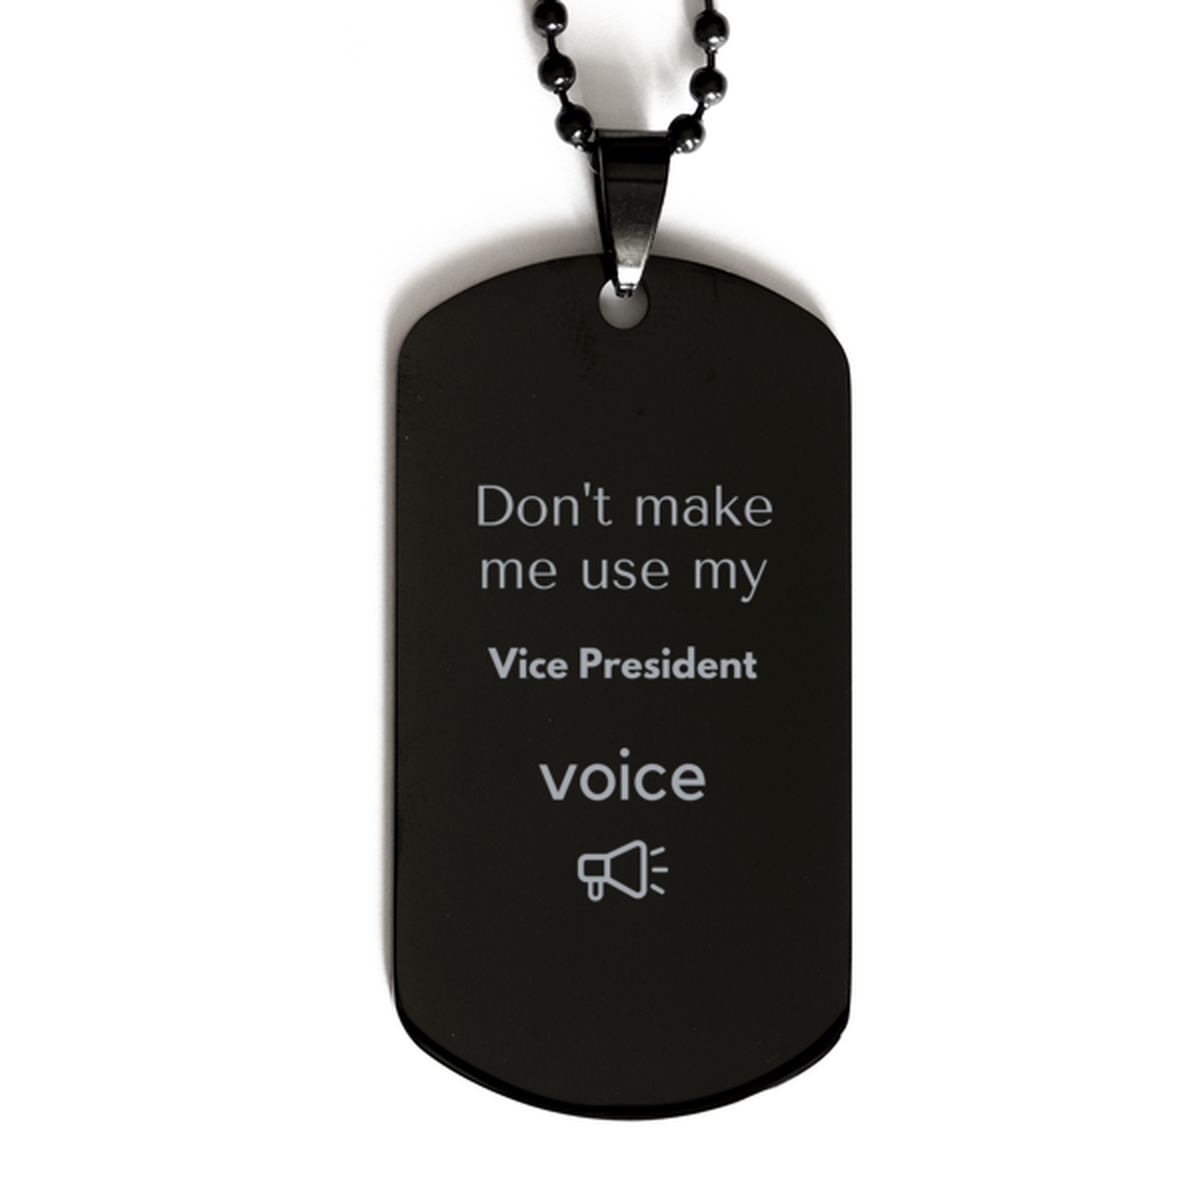 Don't make me use my Vice President voice, Sarcasm Vice President Gifts, Christmas Vice President Black Dog Tag Birthday Unique Gifts For Vice President Coworkers, Men, Women, Colleague, Friends